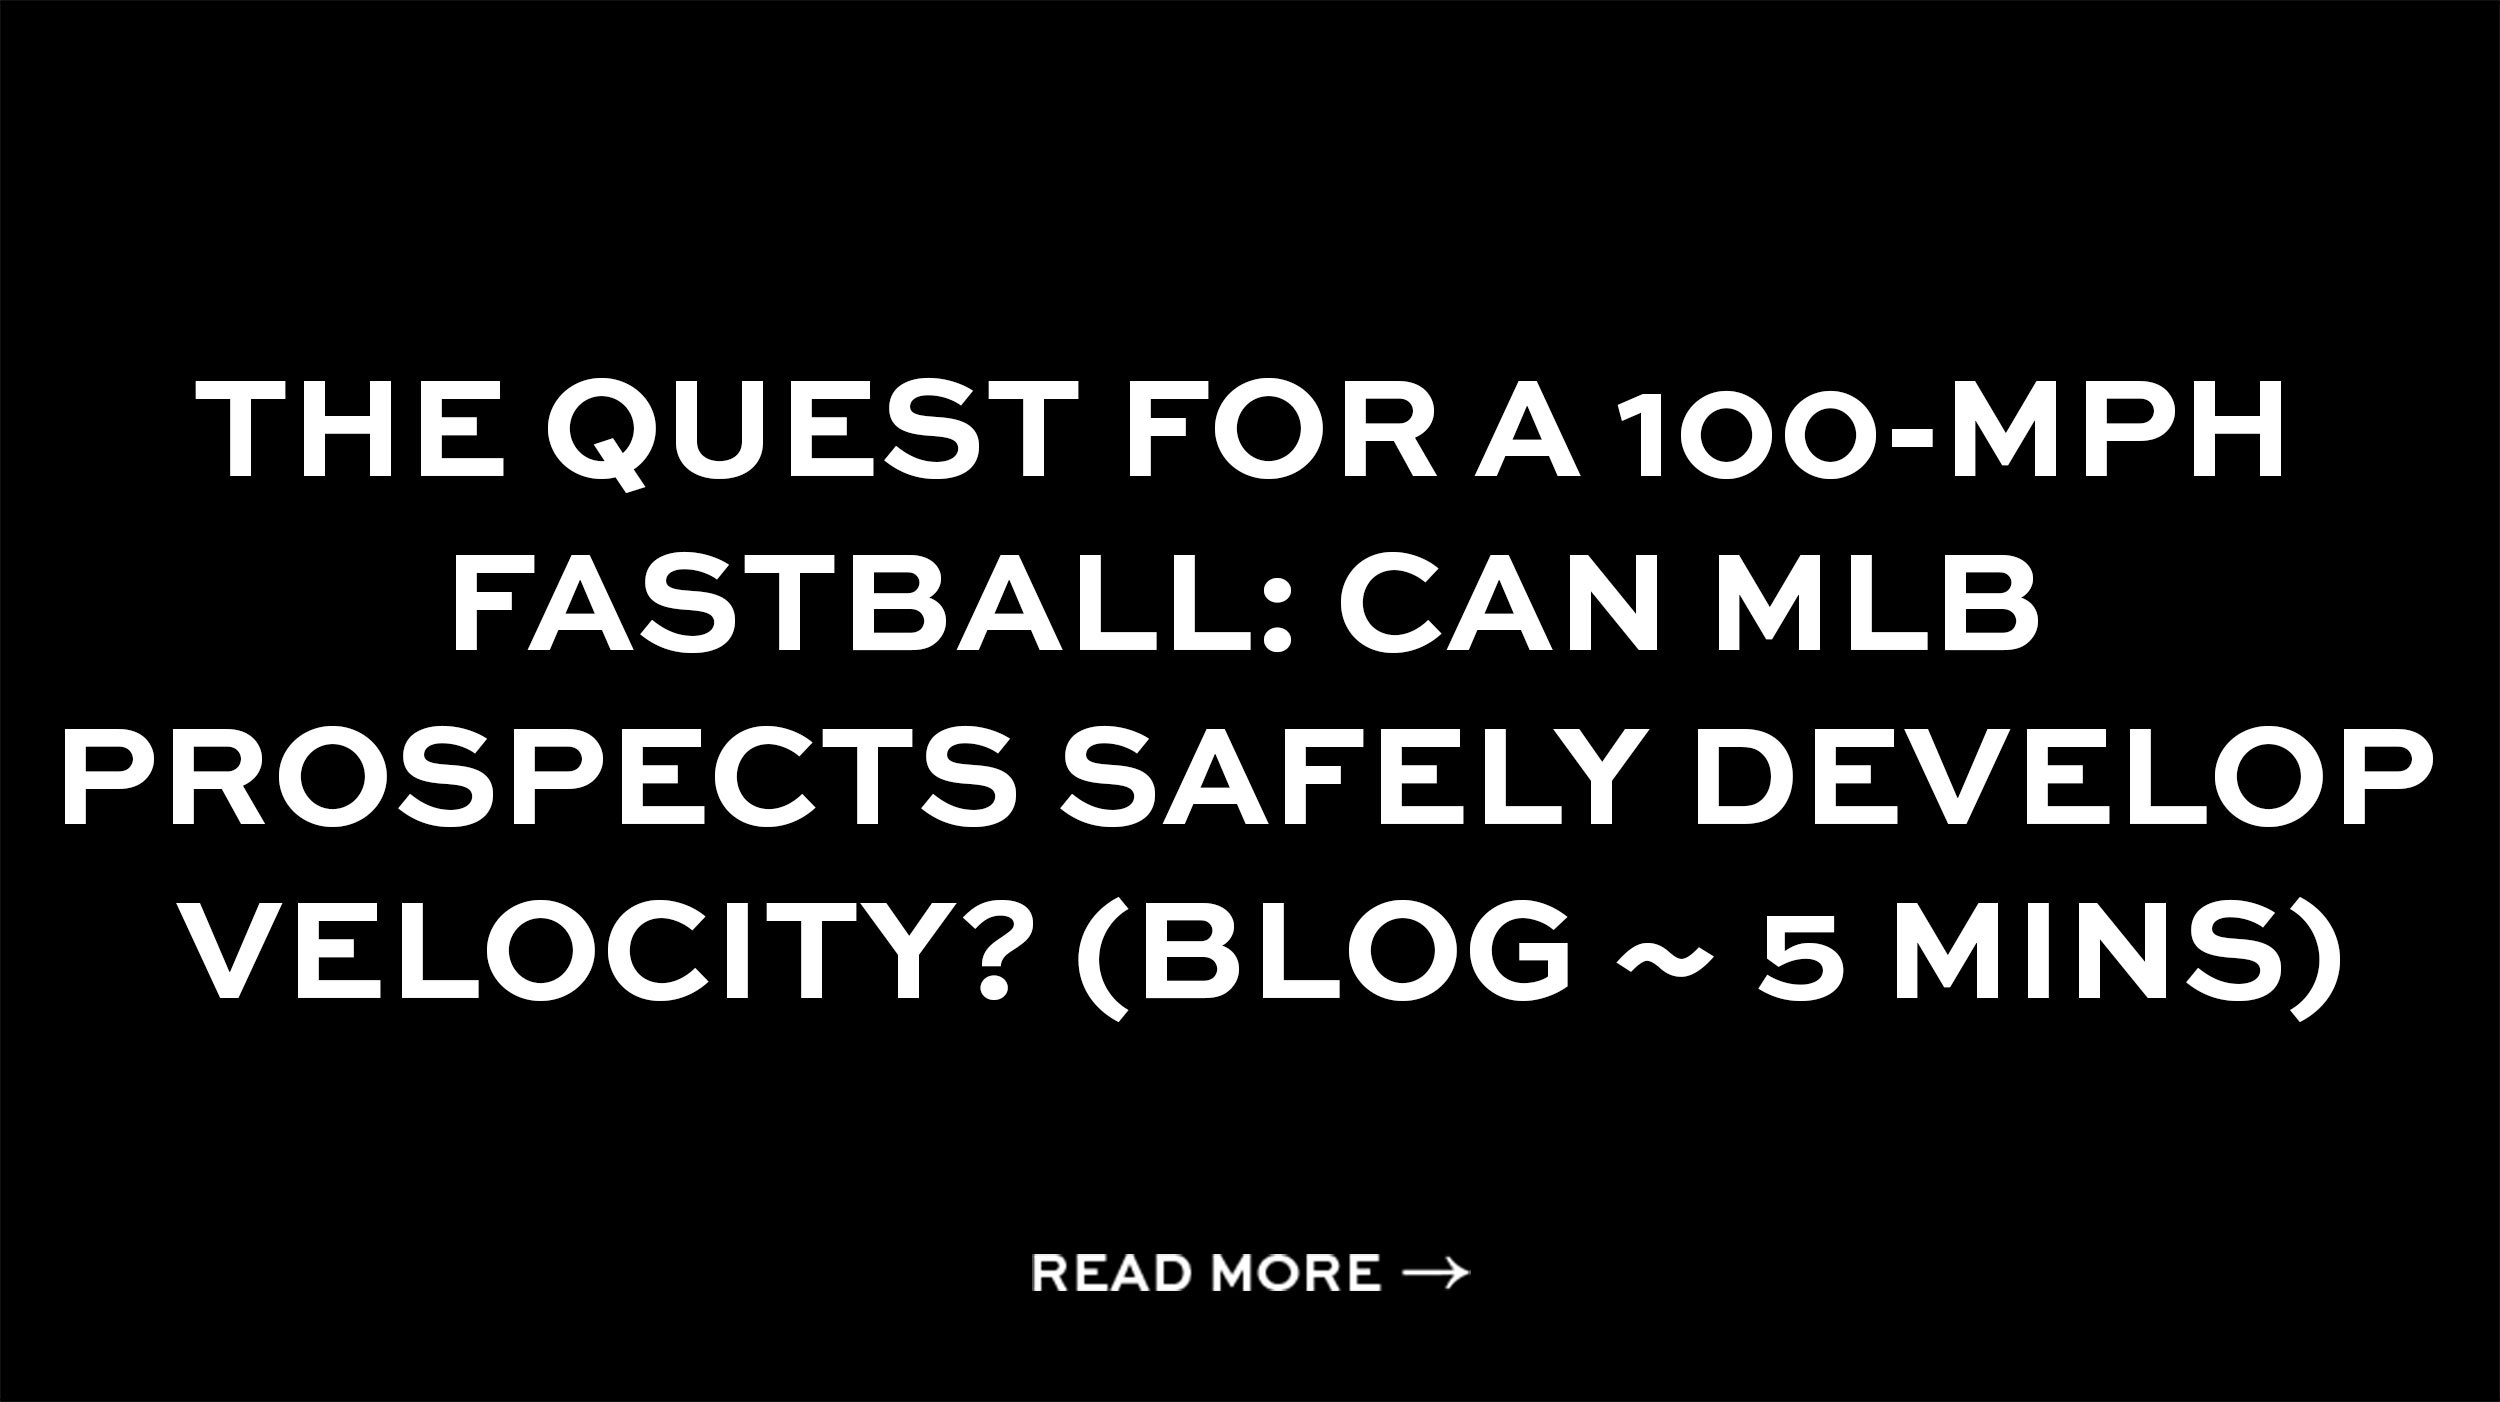 The quest for a 100-mph fastball: Can MLB prospects safely develop velocity? (Blog ~ 5 mins)